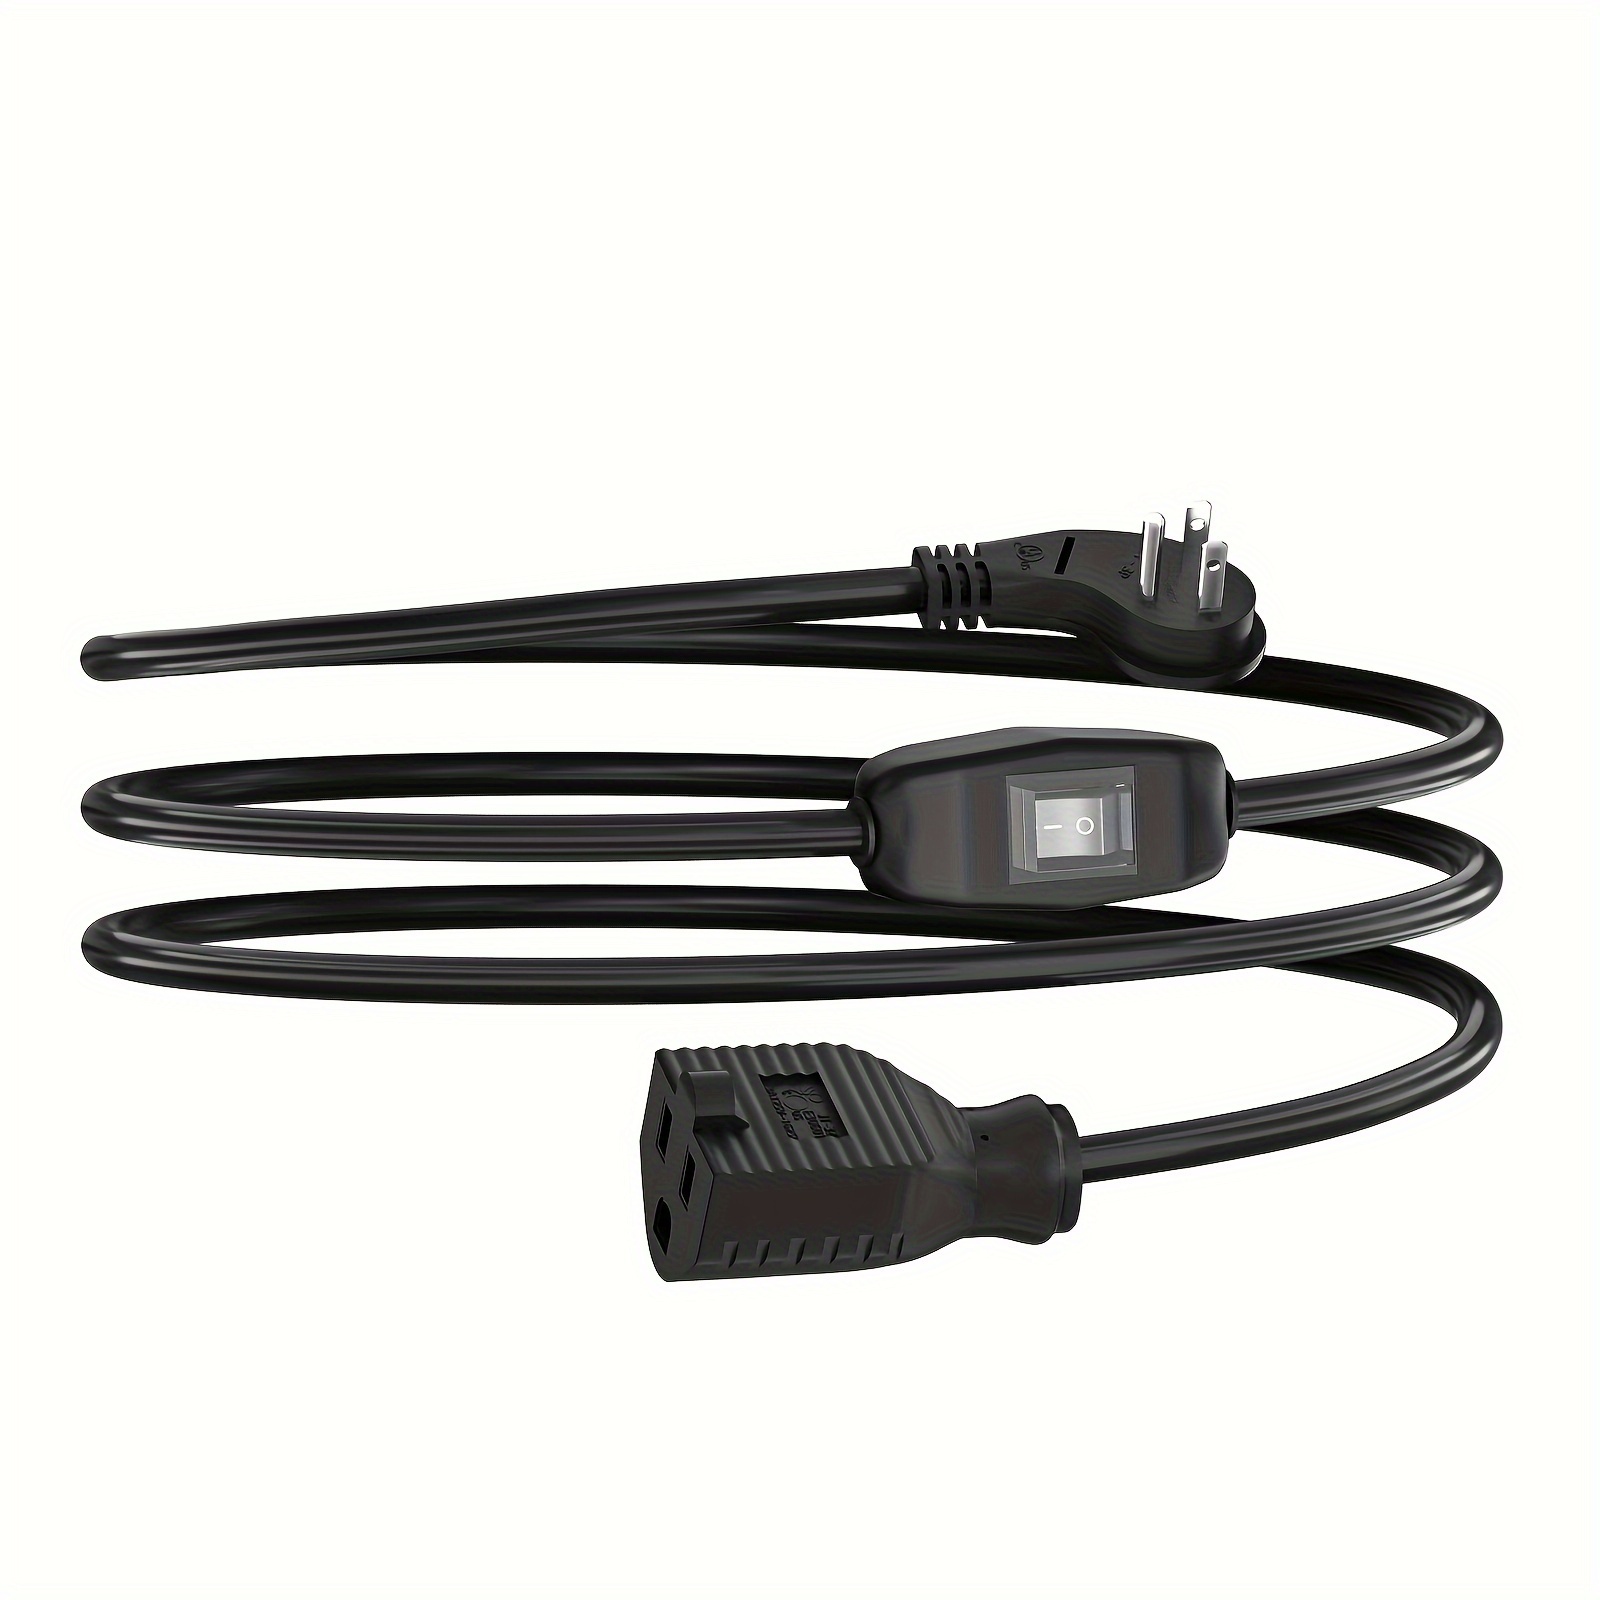 3M Cable Extension